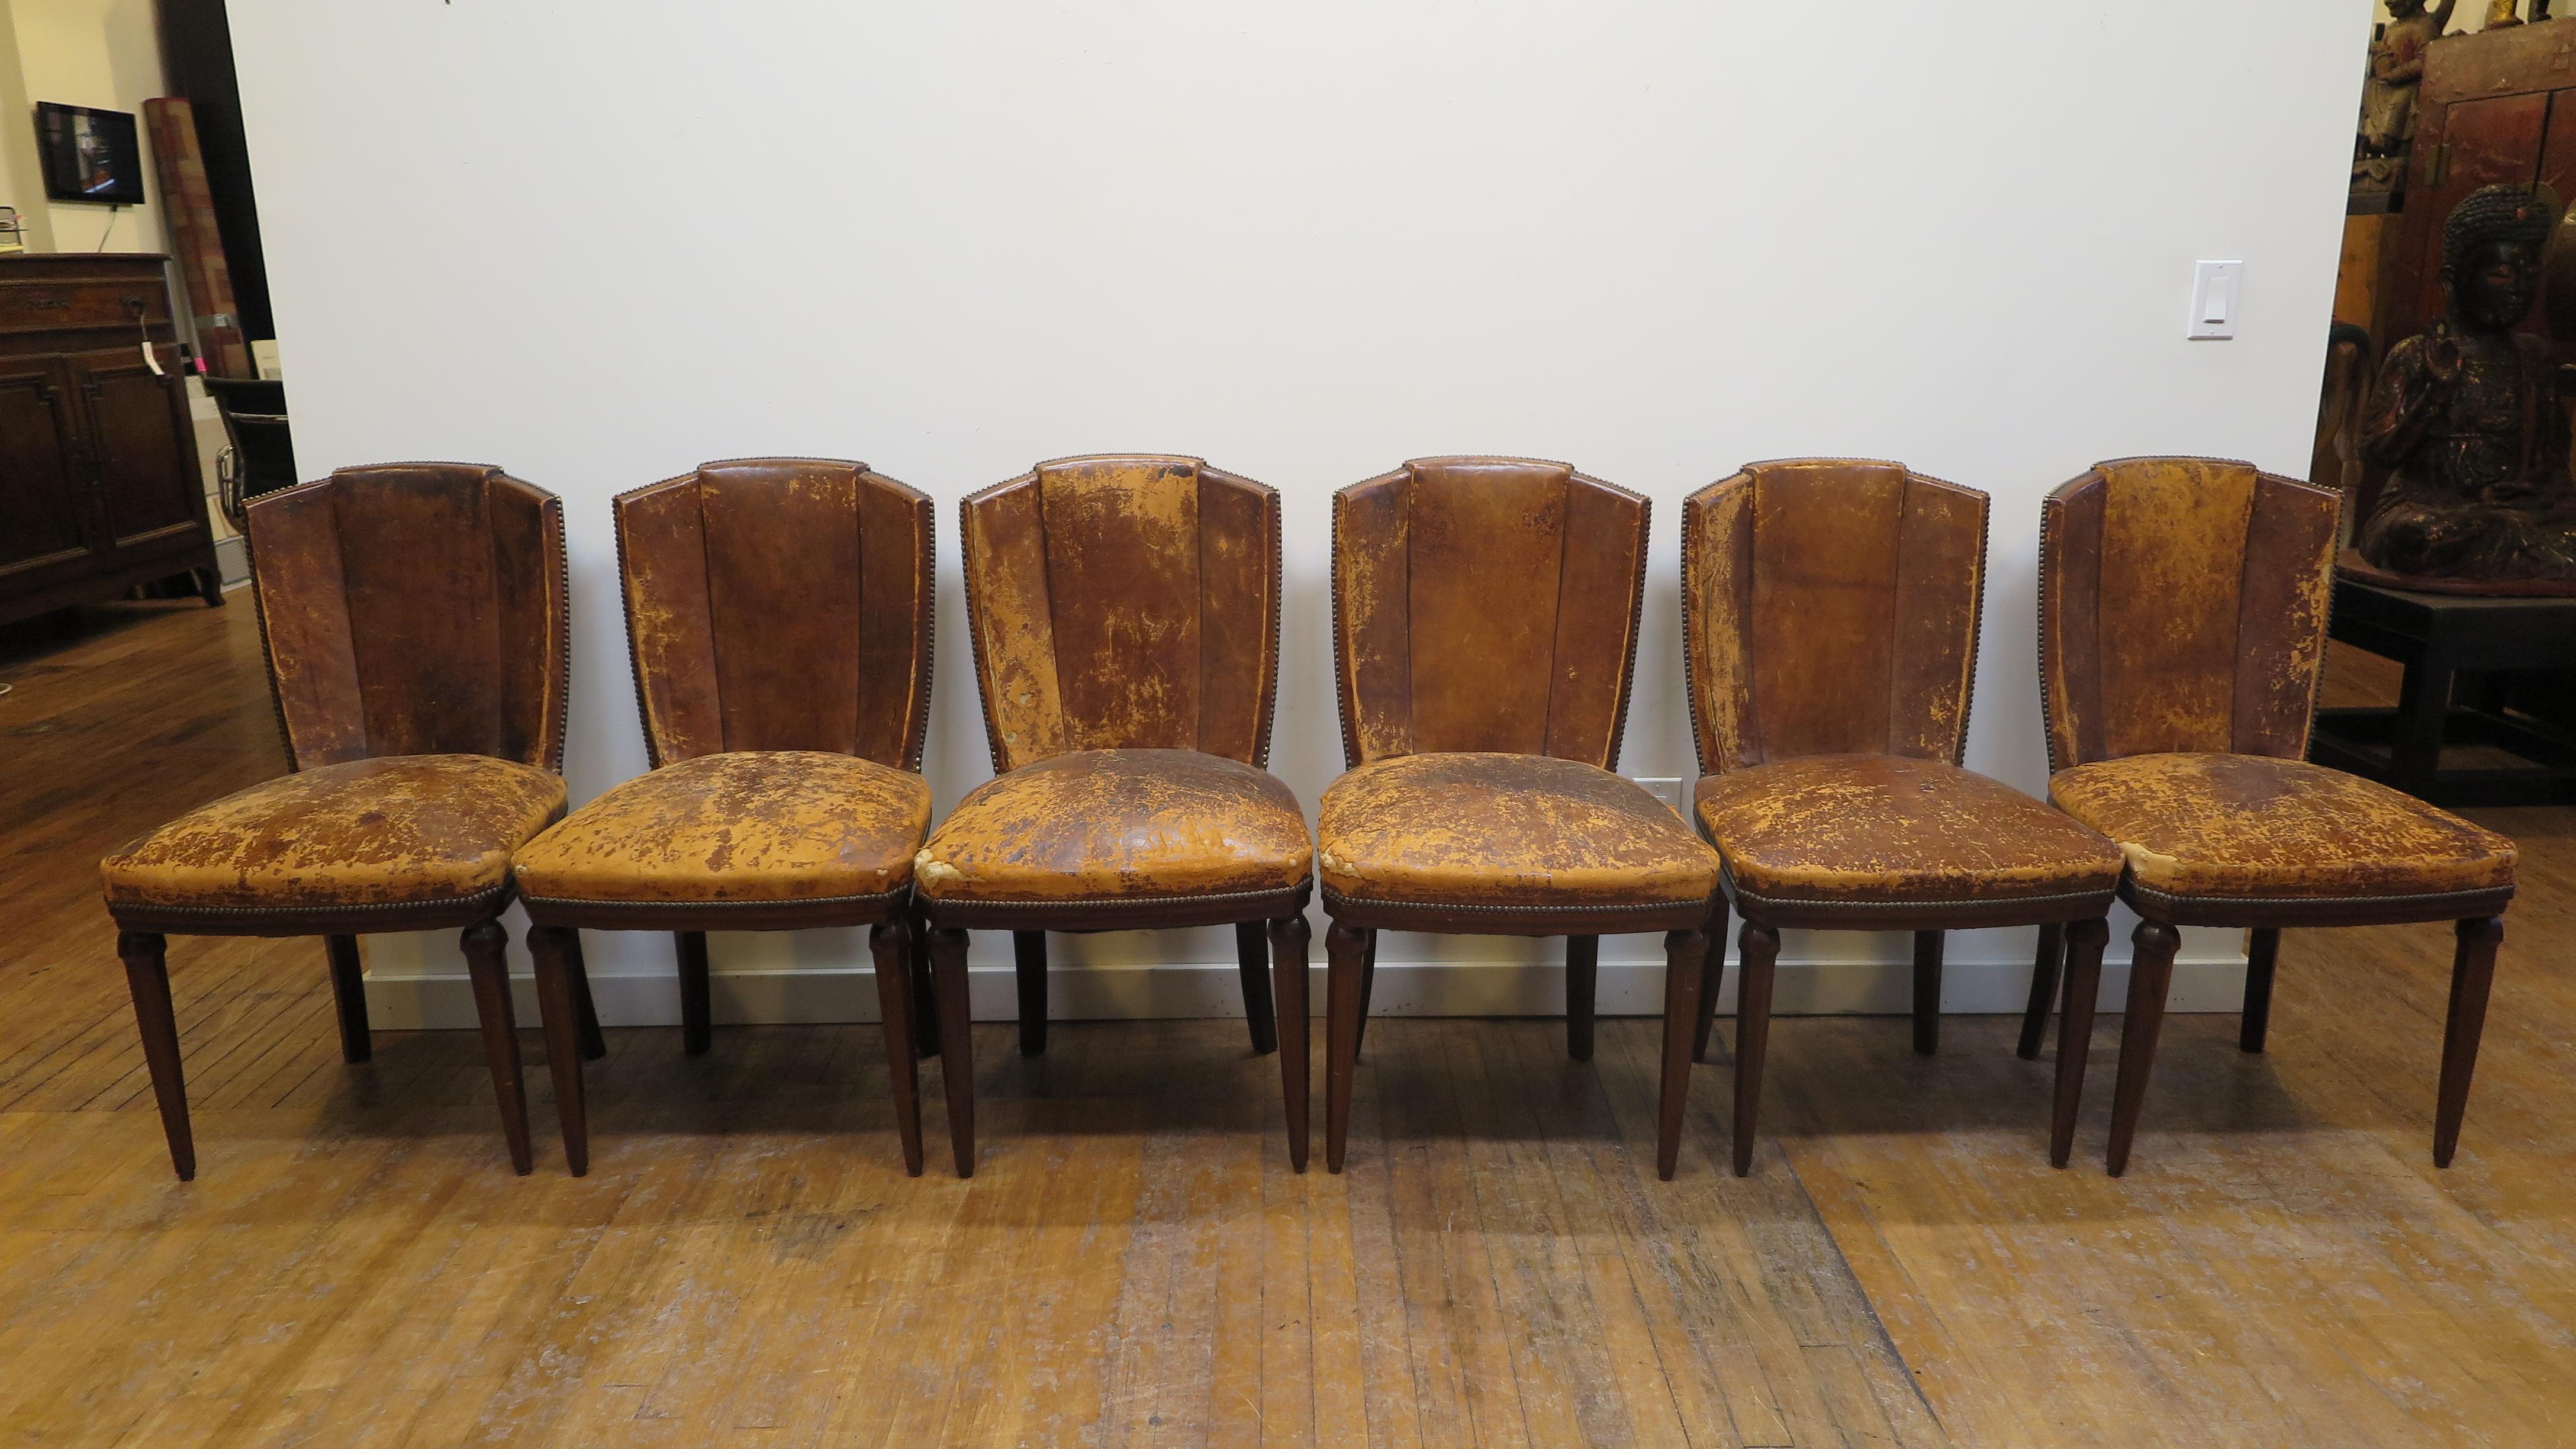 Set of six Art Deco Dining chairs with fan backs. This set needs to be recovered. The Mahogany frames are in very good condition, solid and strong. The leather is deteriorating and needs recovering. Fan Back Style is very comfortable and elegant.